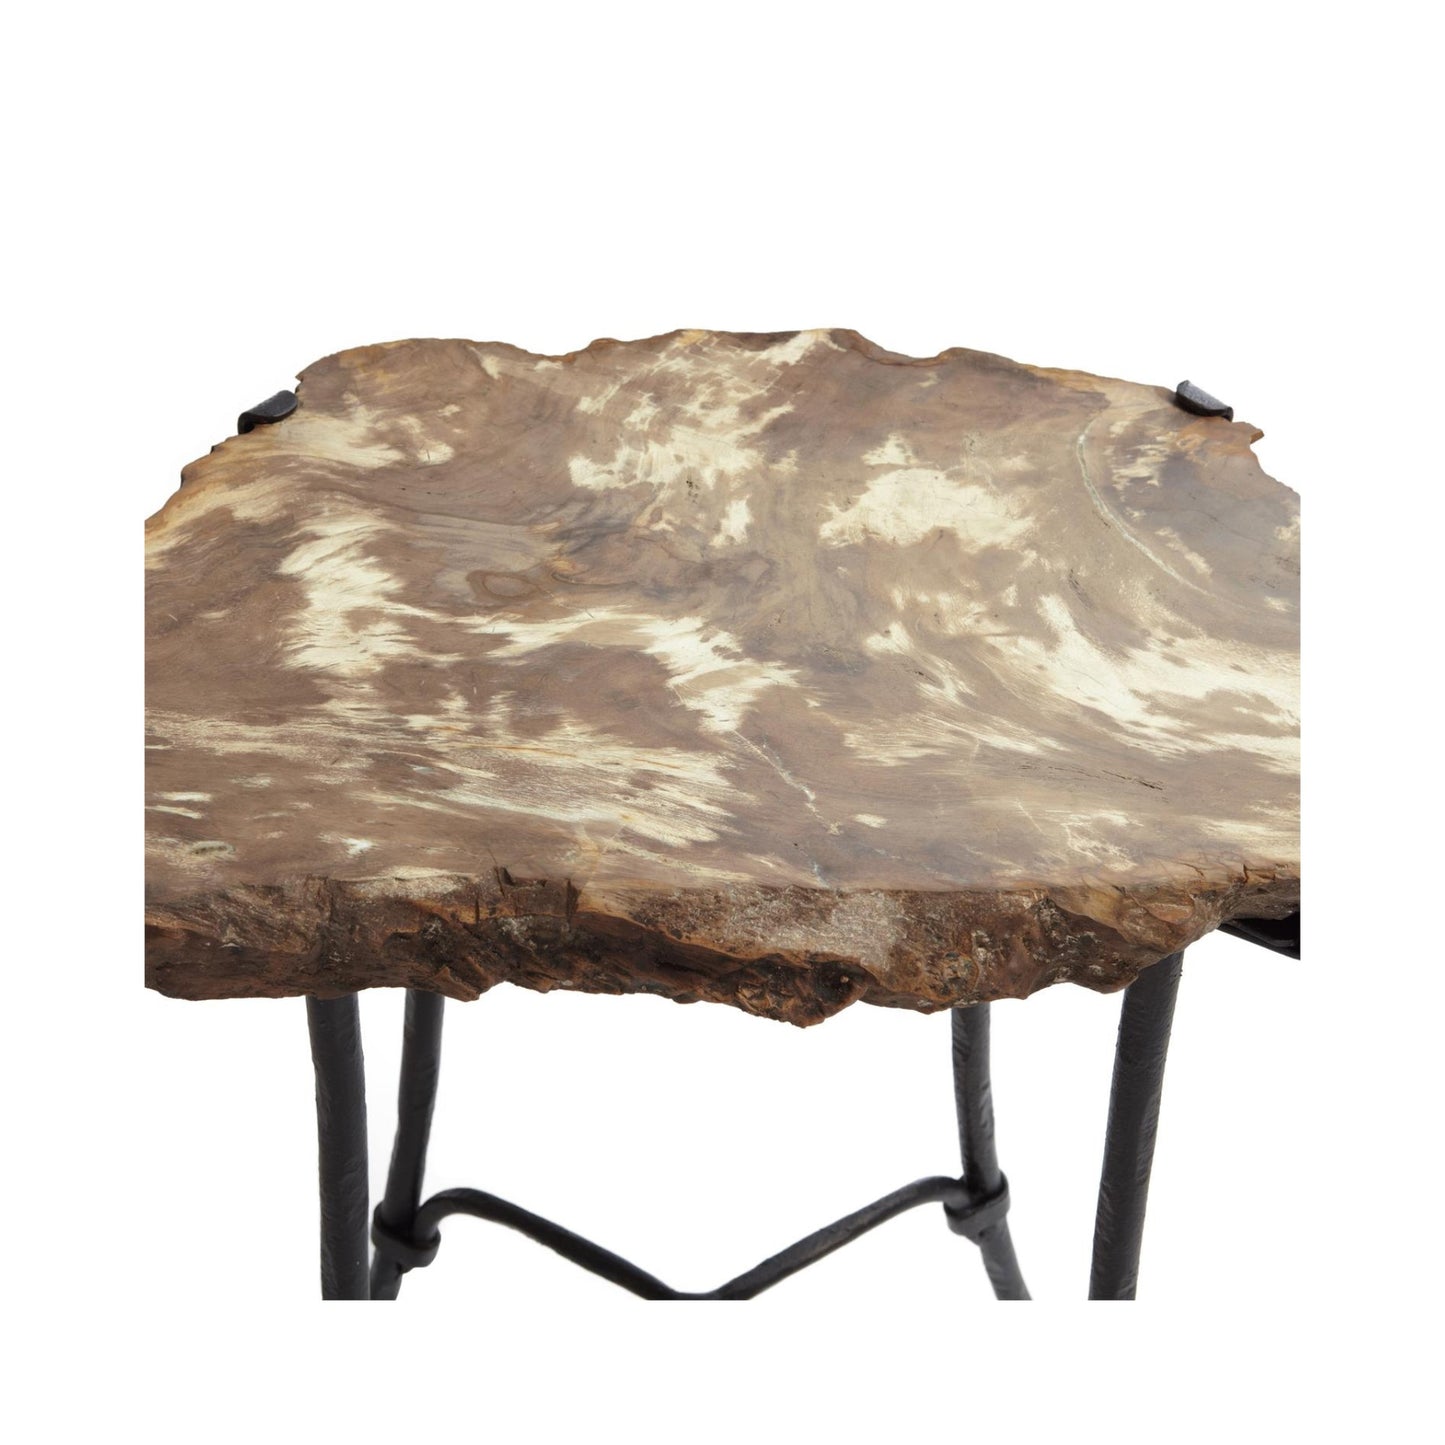 Petrified Accent Table